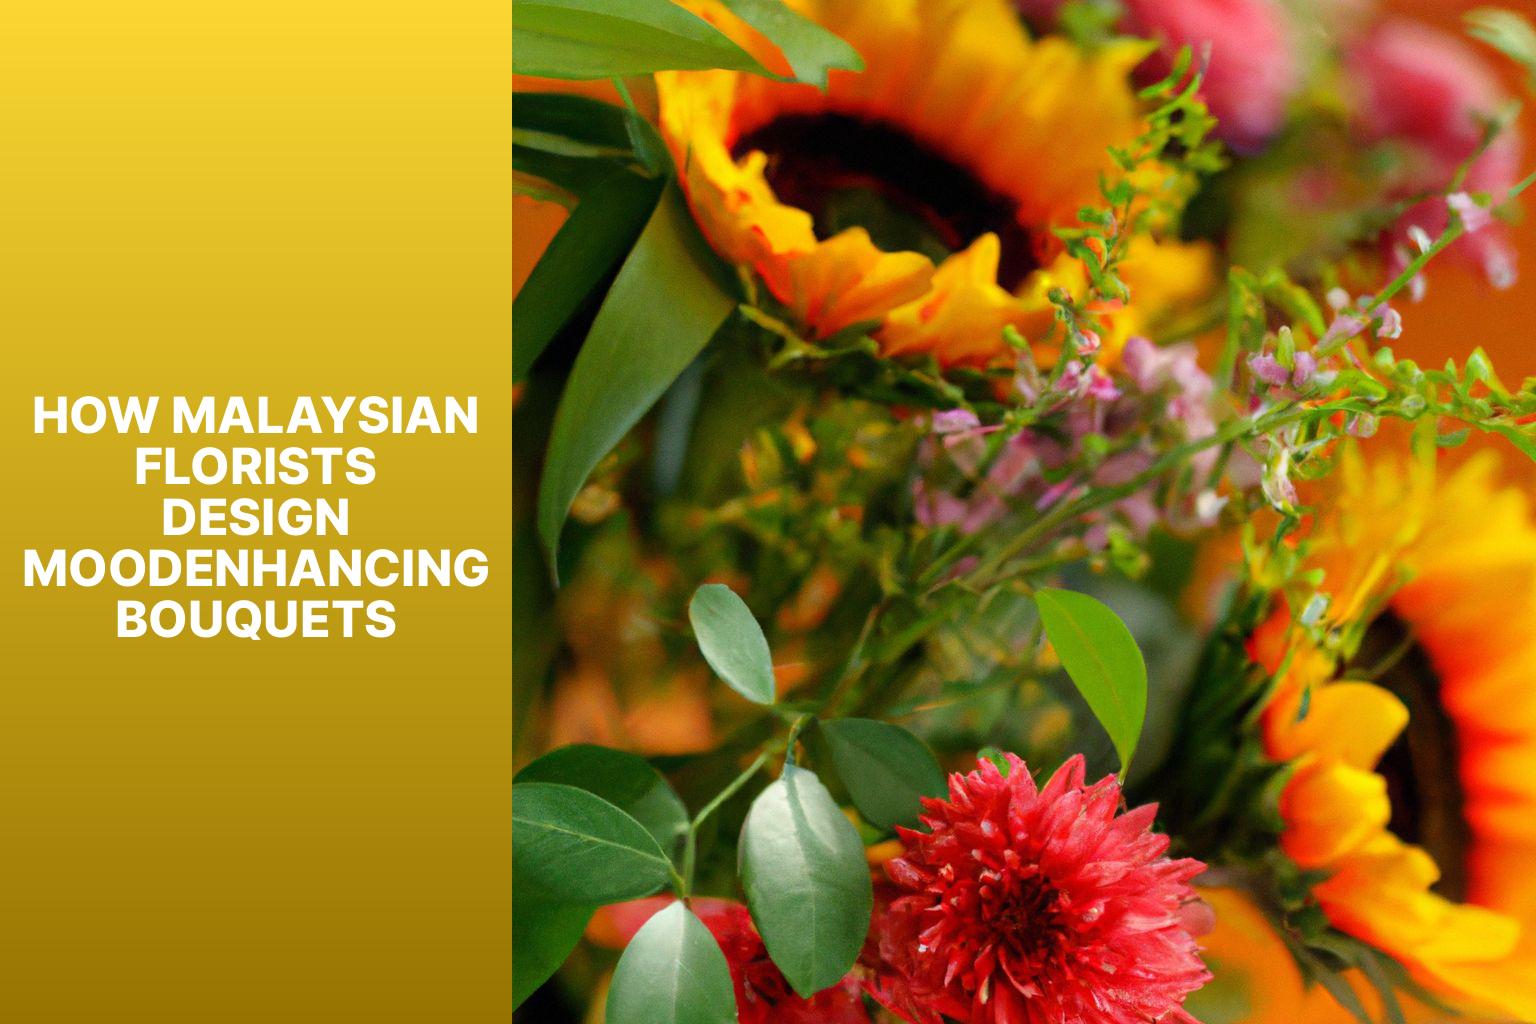 How Malaysian Florists Design MoodEnhancing Bouquets